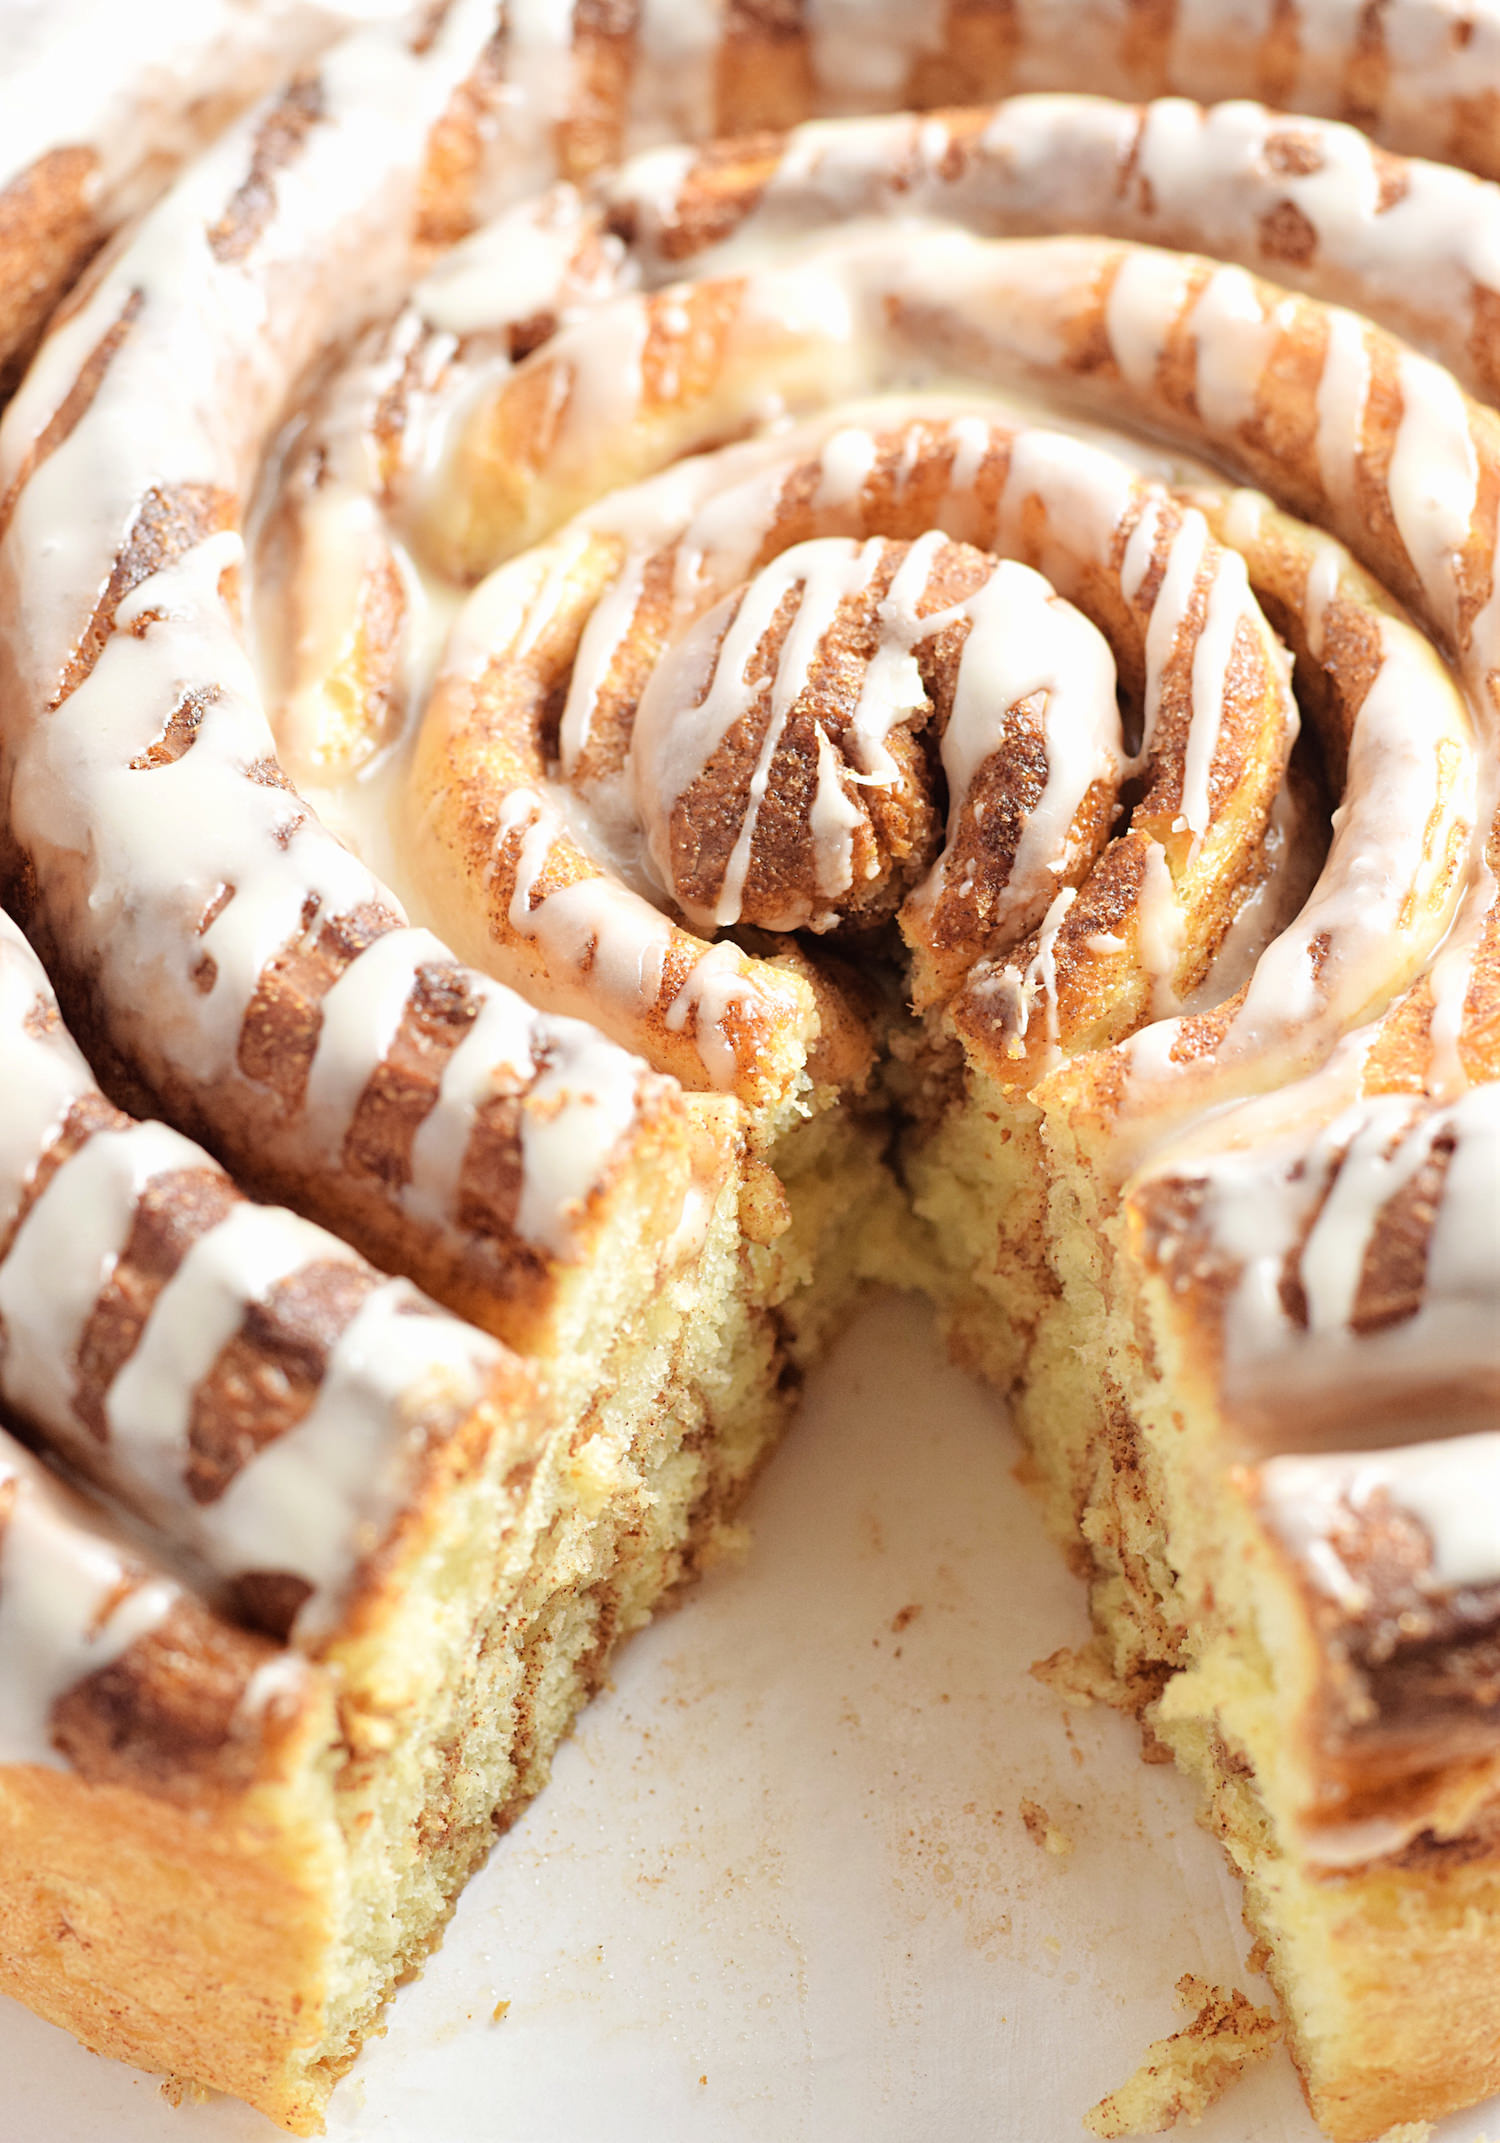 https://images.squarespace-cdn.com/content/v1/54a04011e4b0d1a214af85a9/1437359827200-K6JDWD4VVEED037SPBNV/Cinnamon+Roll+Cake+-+soft%2C+fluffy%2C+gooey+cinnamon+rolls+made+easier+and+more+beautiful+in+the+form+of+a+giant+cinnamon+roll+cake%21+Must+try%21+%7C+trufflesandtrends.com